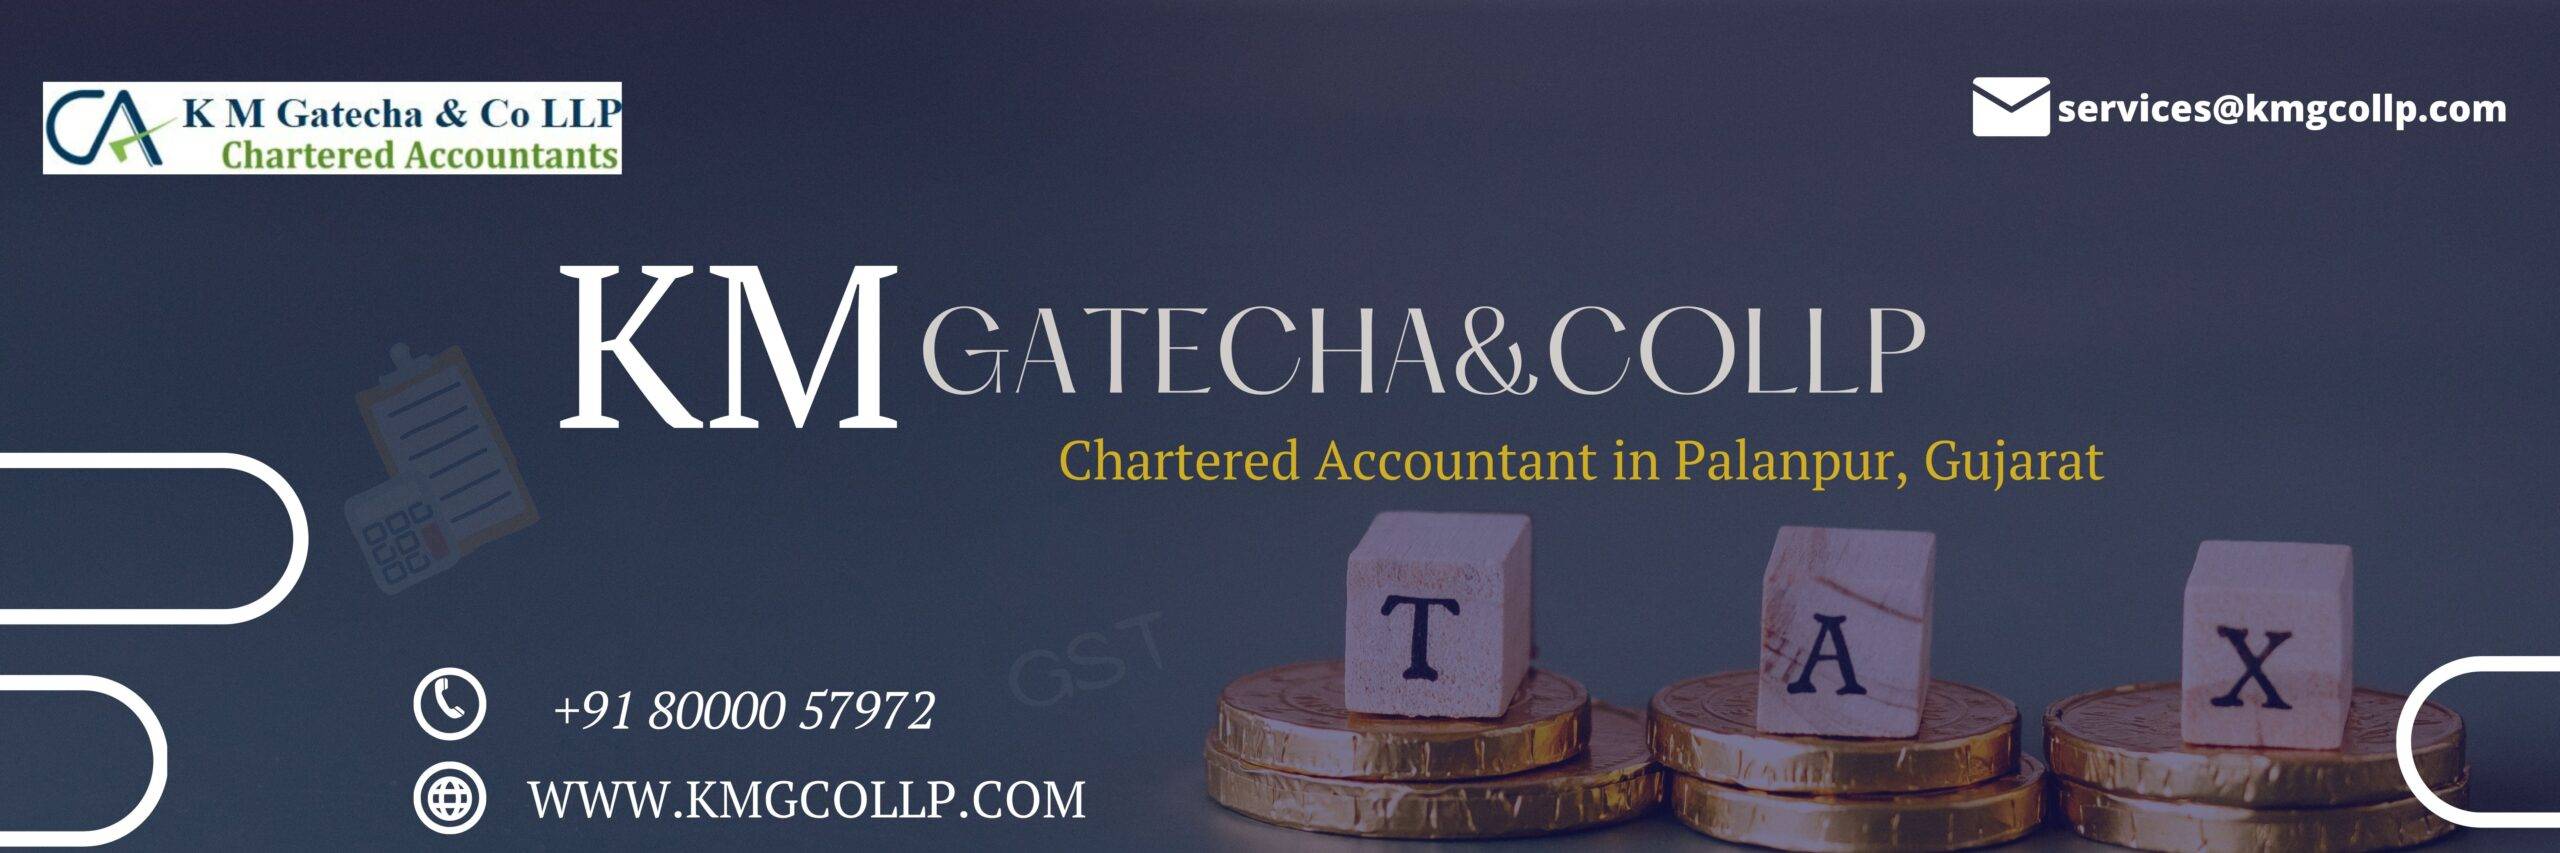 ca chartered accountant in Palanpur